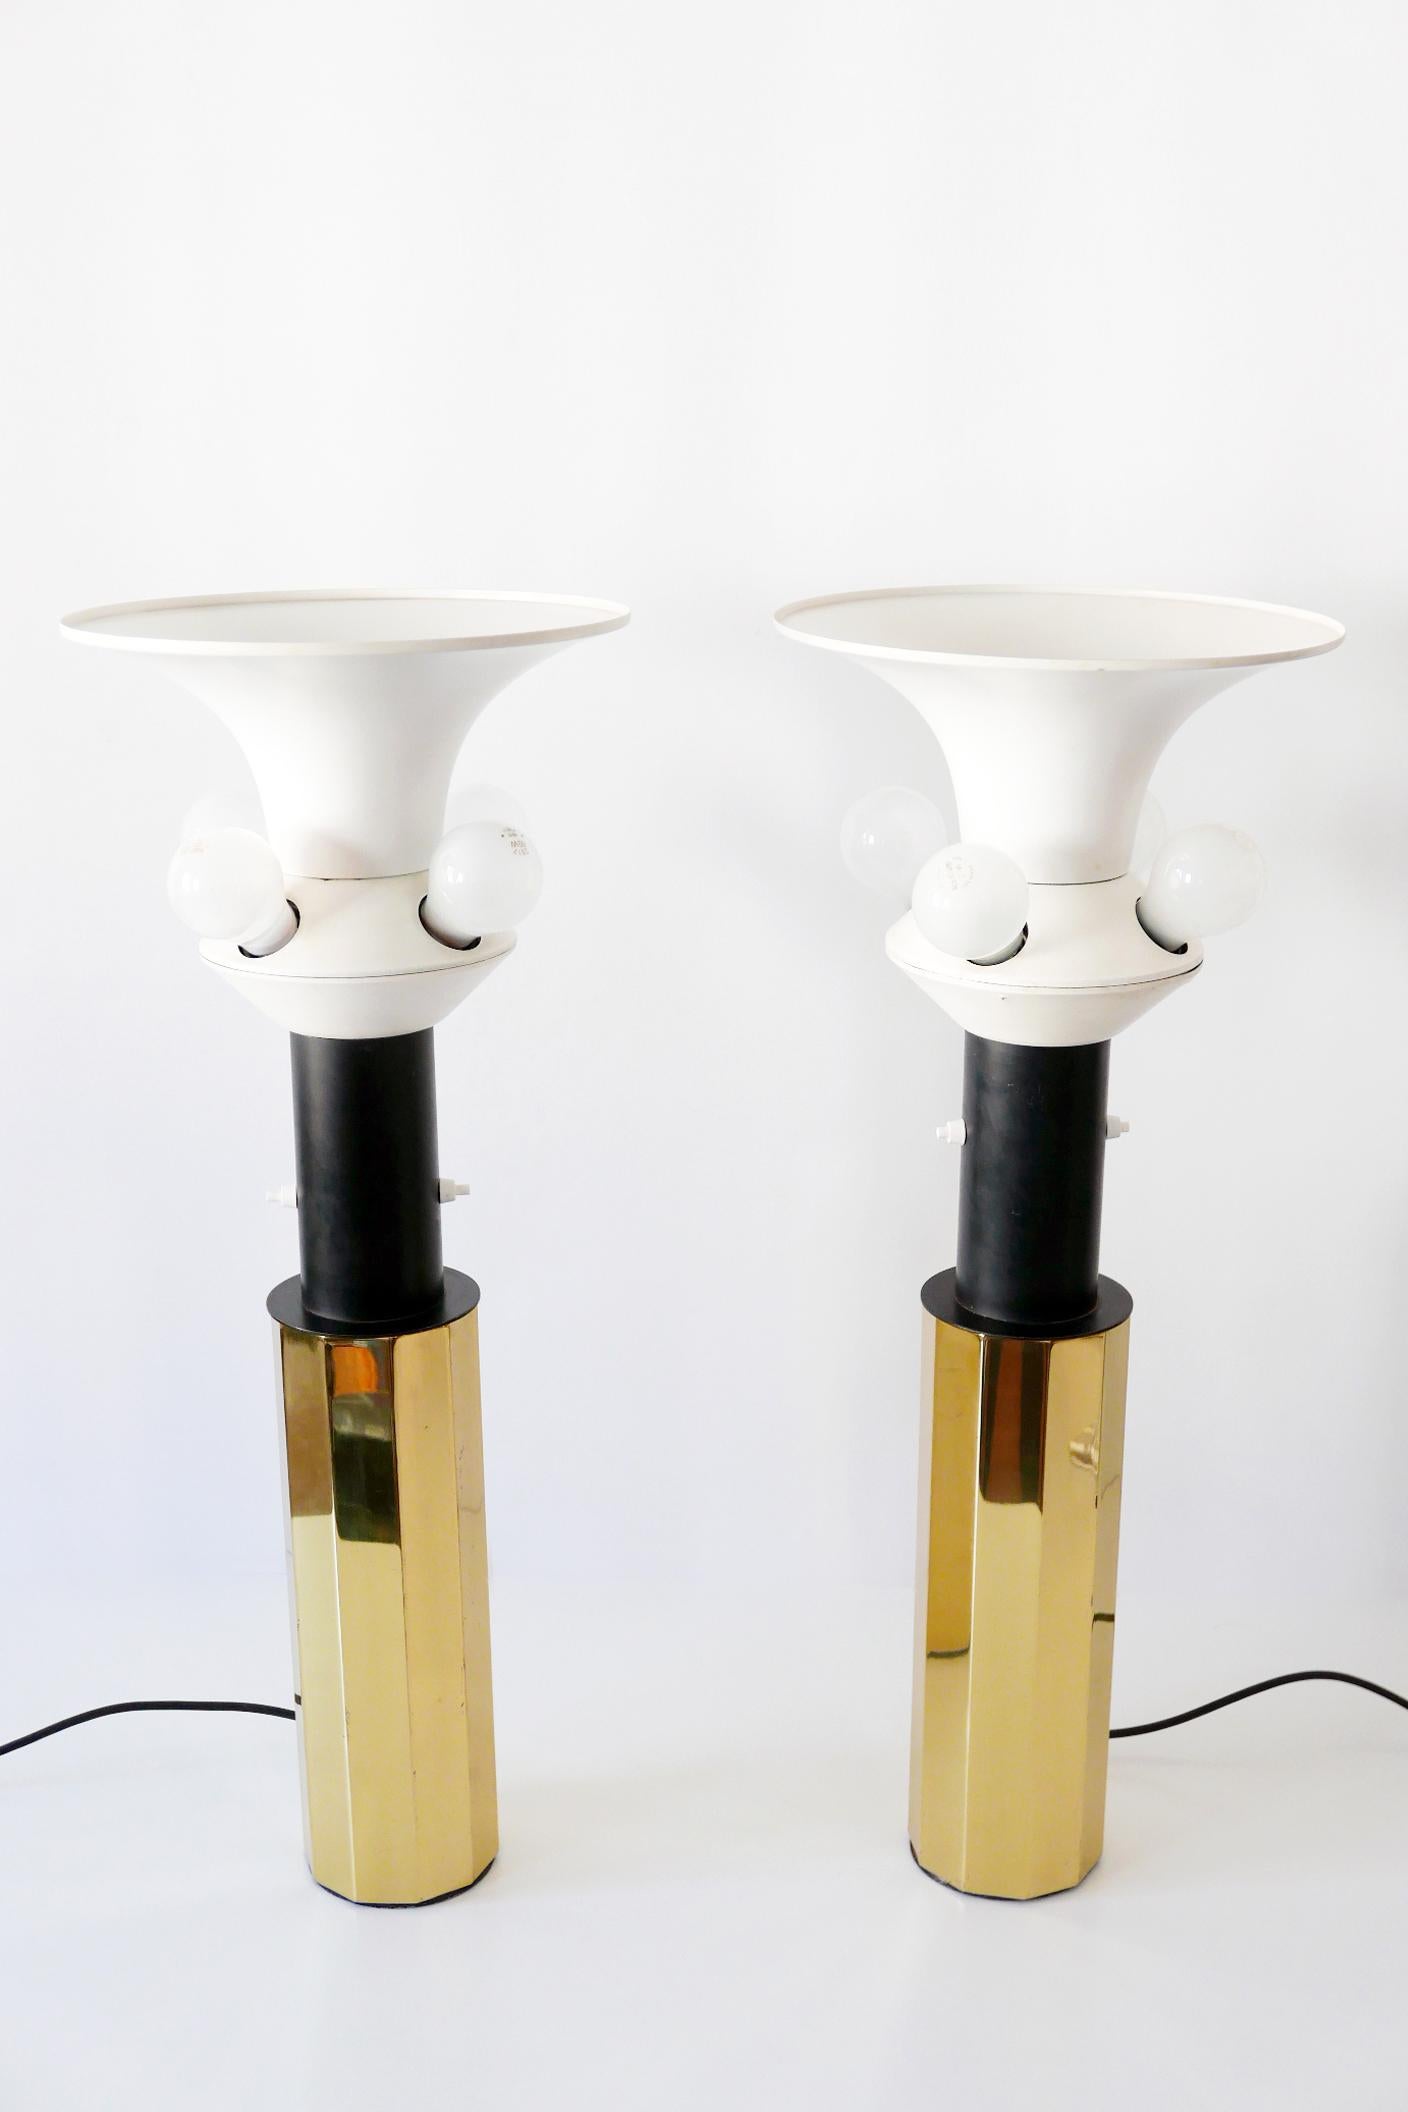 Set of Two Huge, 5-Flamed Midcentury Decagonal Brass Table Lamps, 1960s, Germany For Sale 6